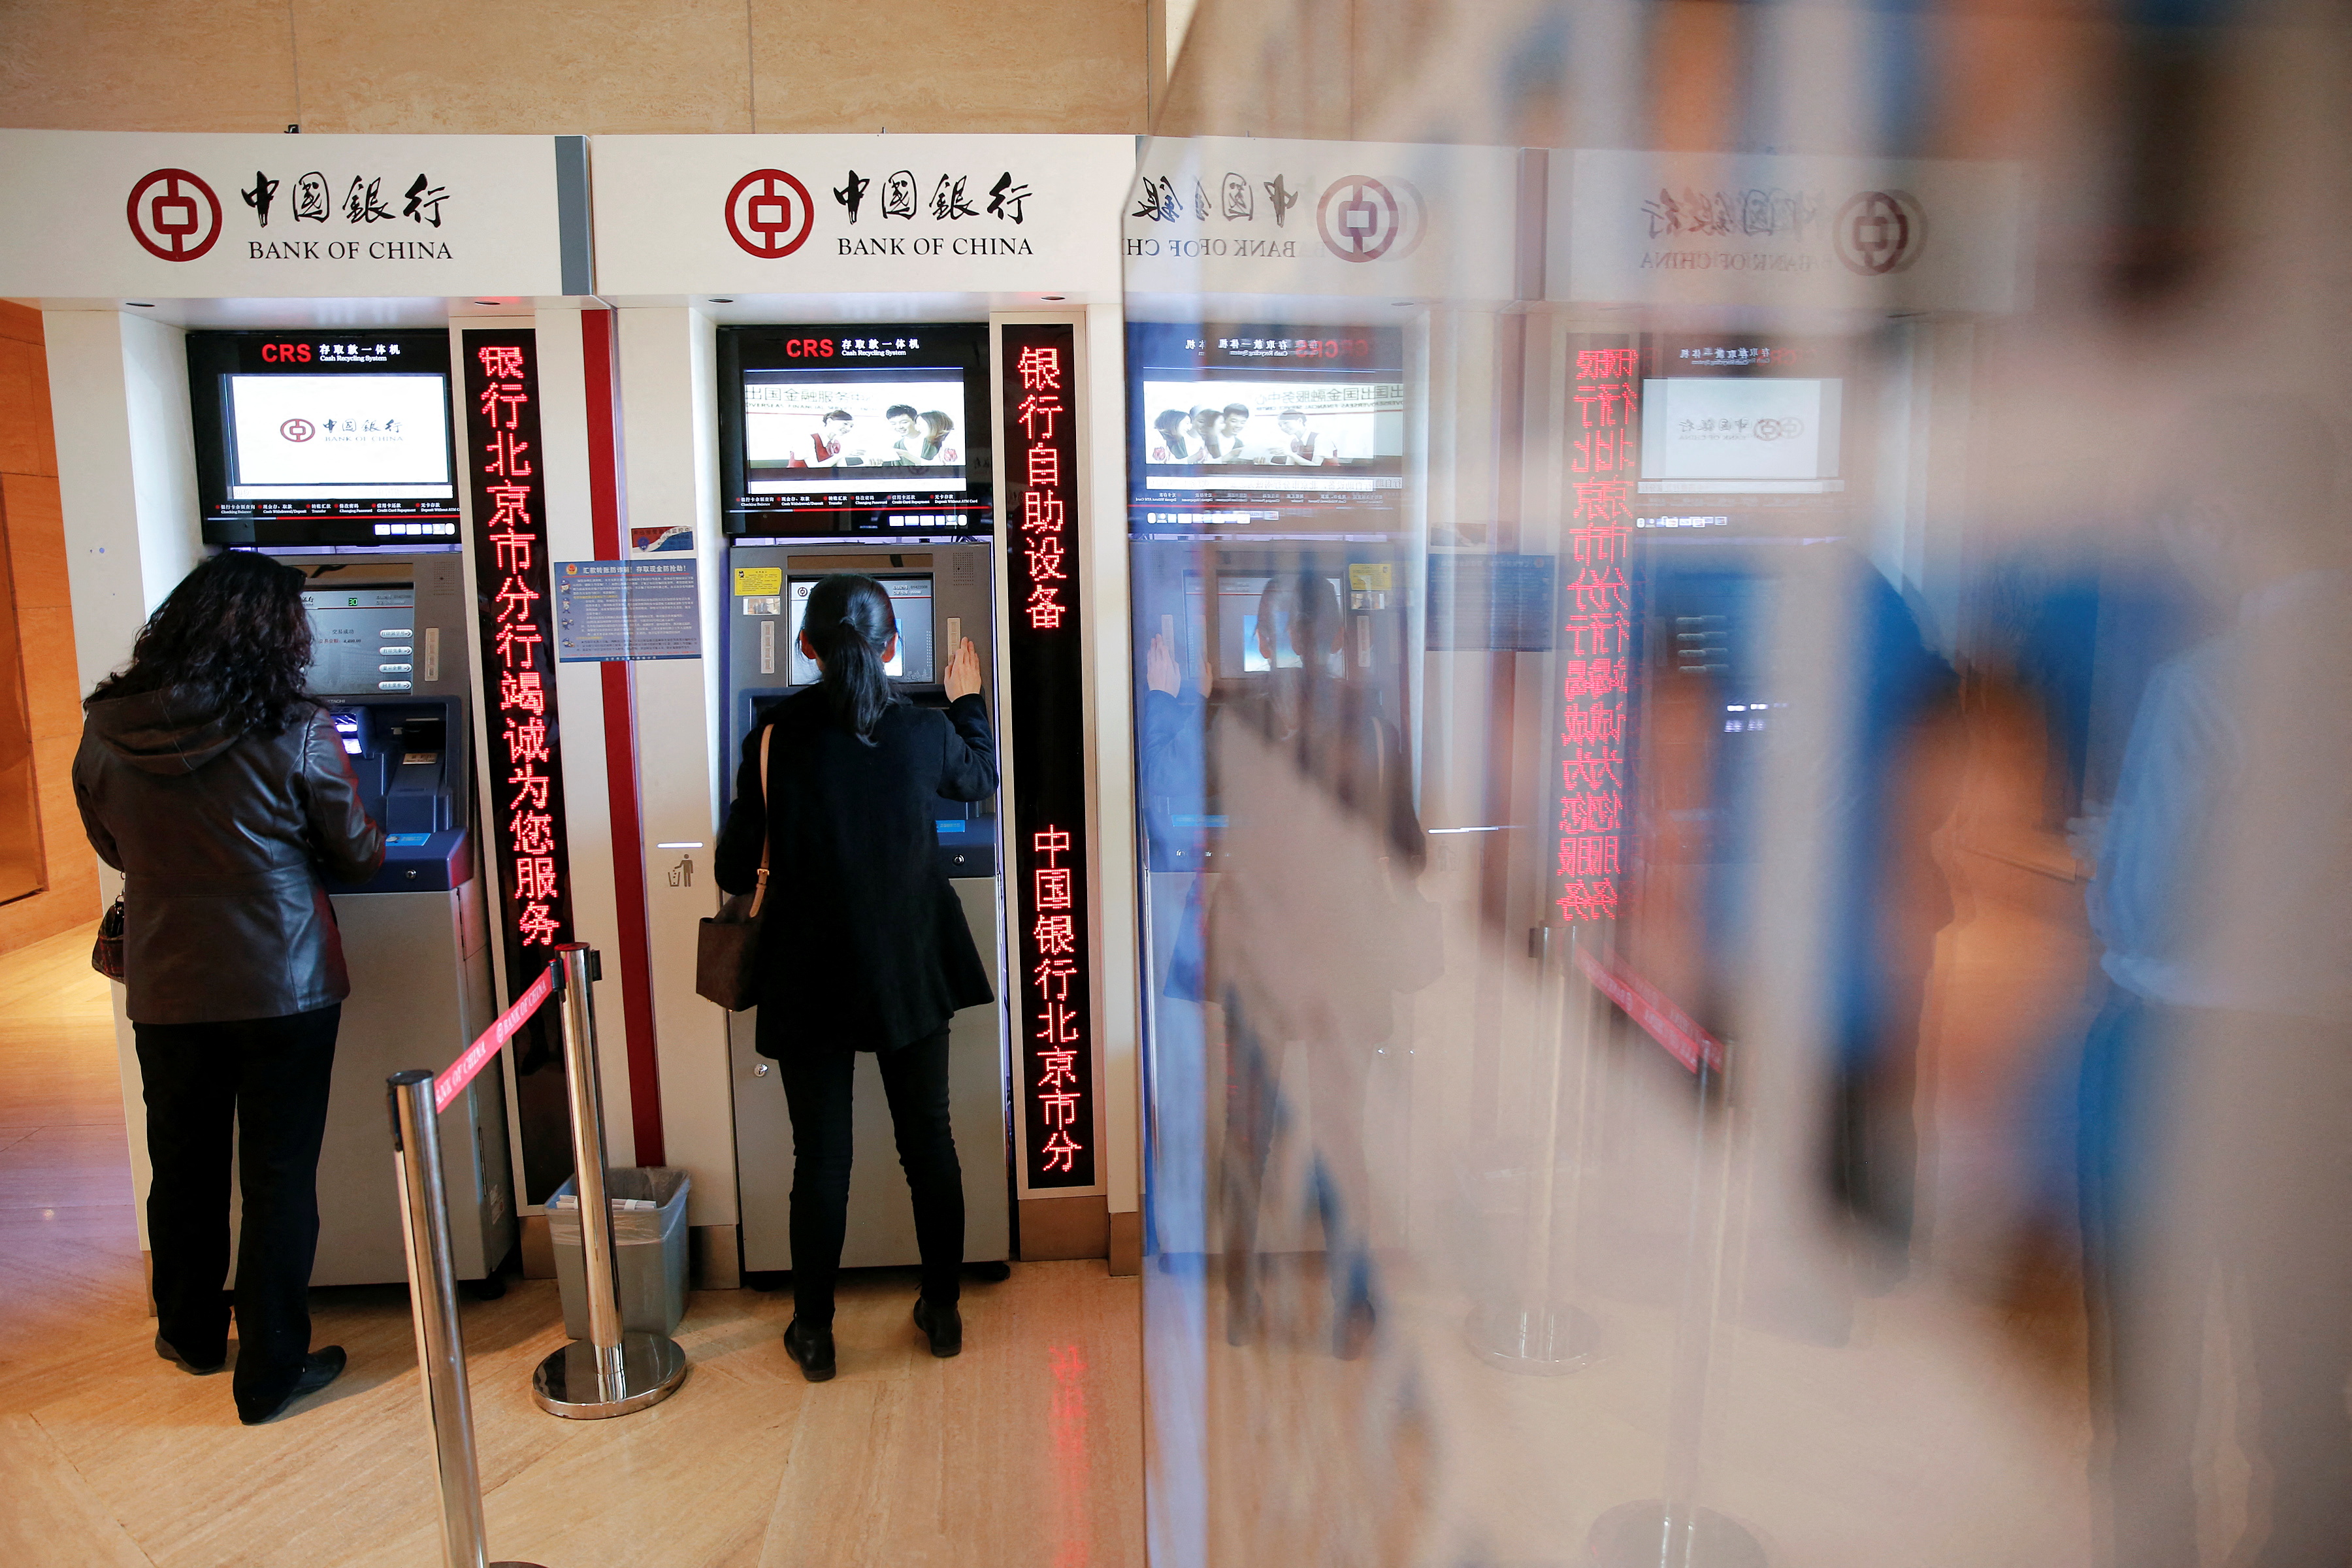 People use ATM's inside the Bank of China head office building in Beijing